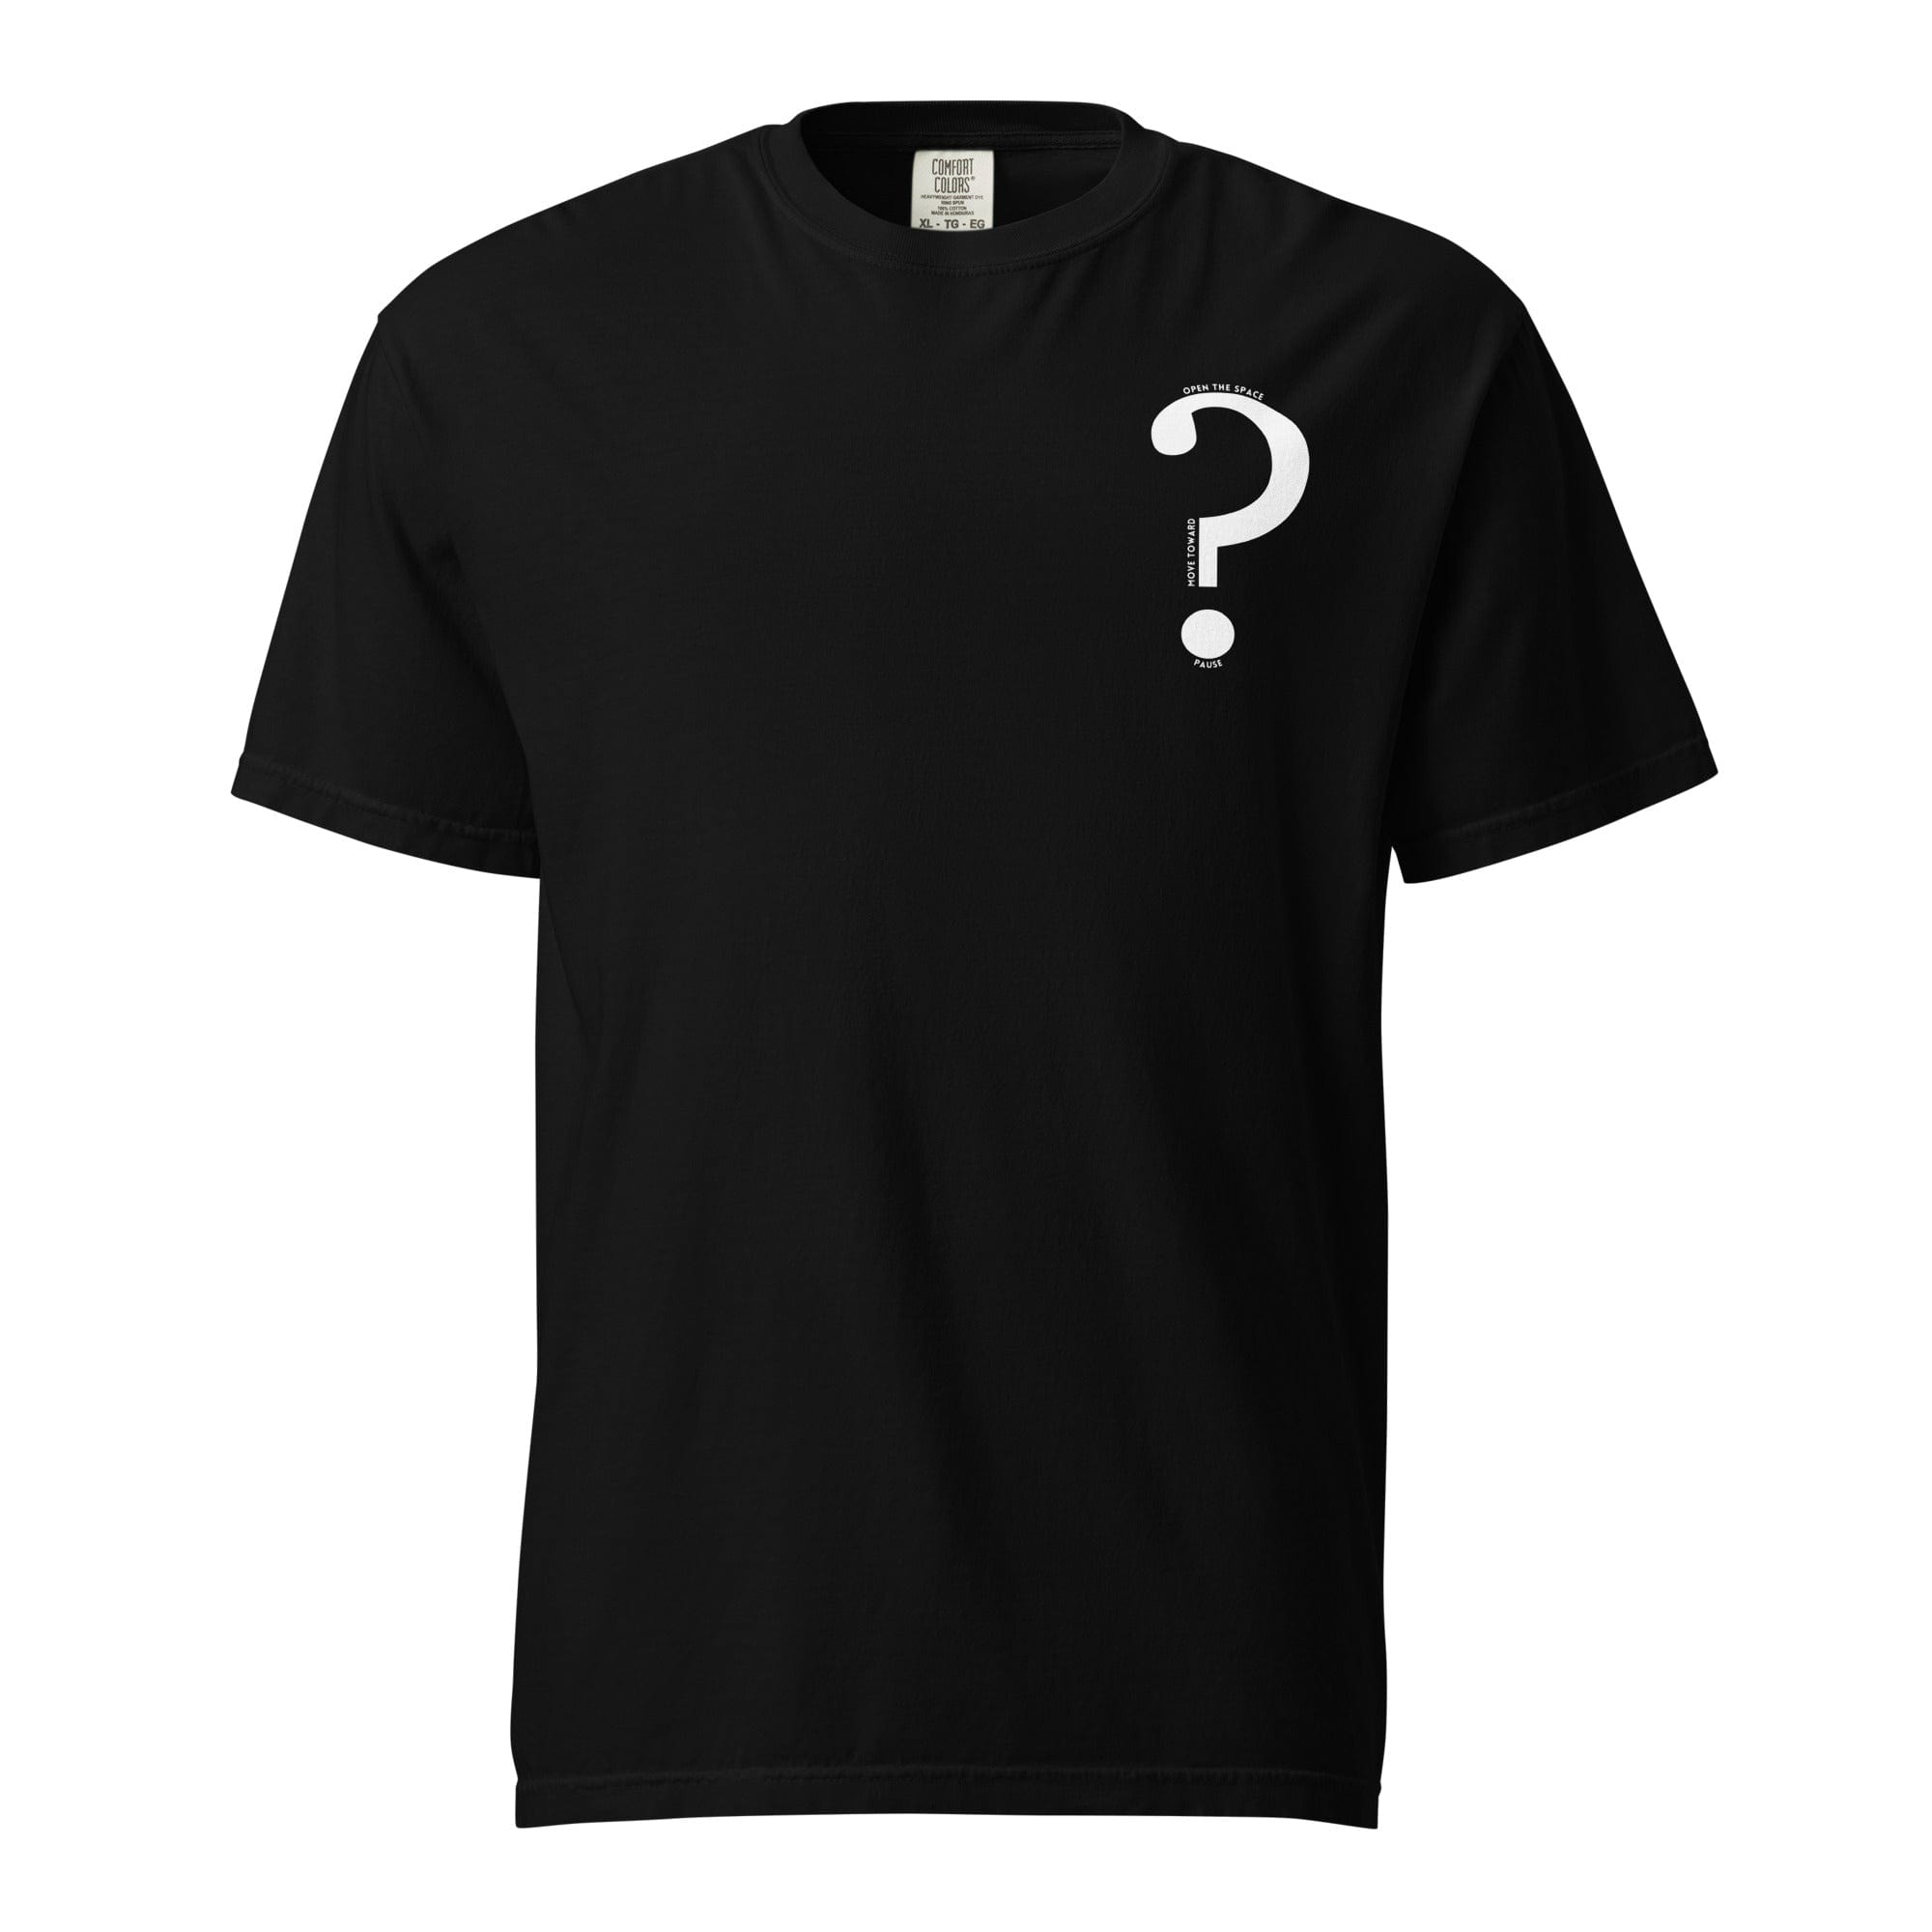 Question Mark: Pause, Move Toward, Open the Space | T-shirt Black / S Shirts & Tops Jolly & Goode